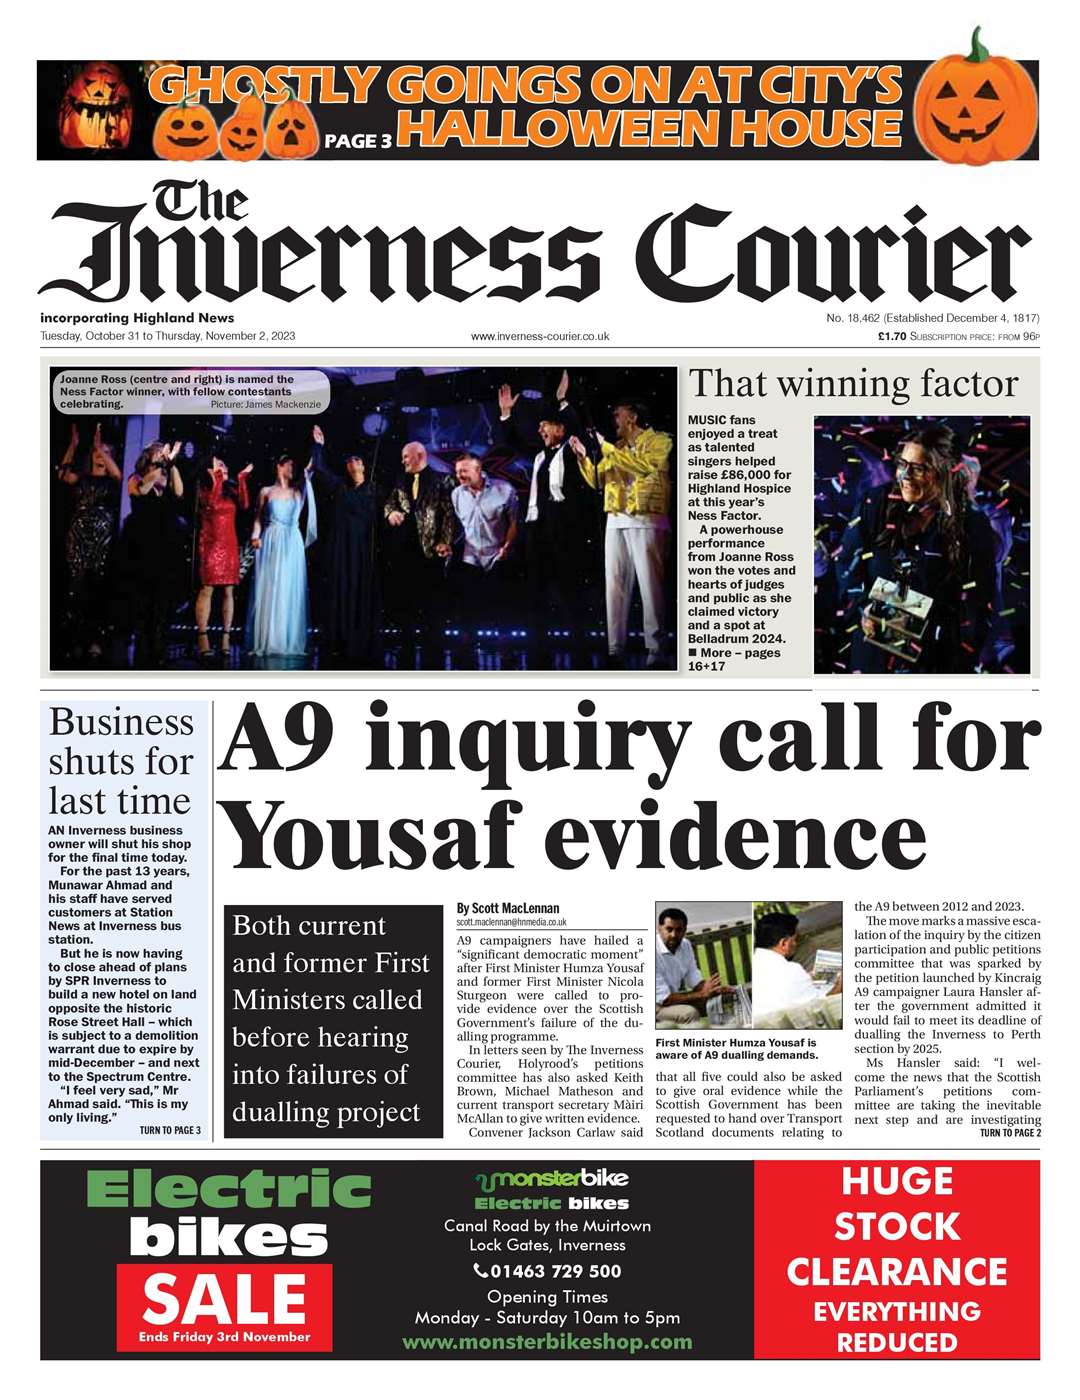 The Inverness Courier, October 31, front page.